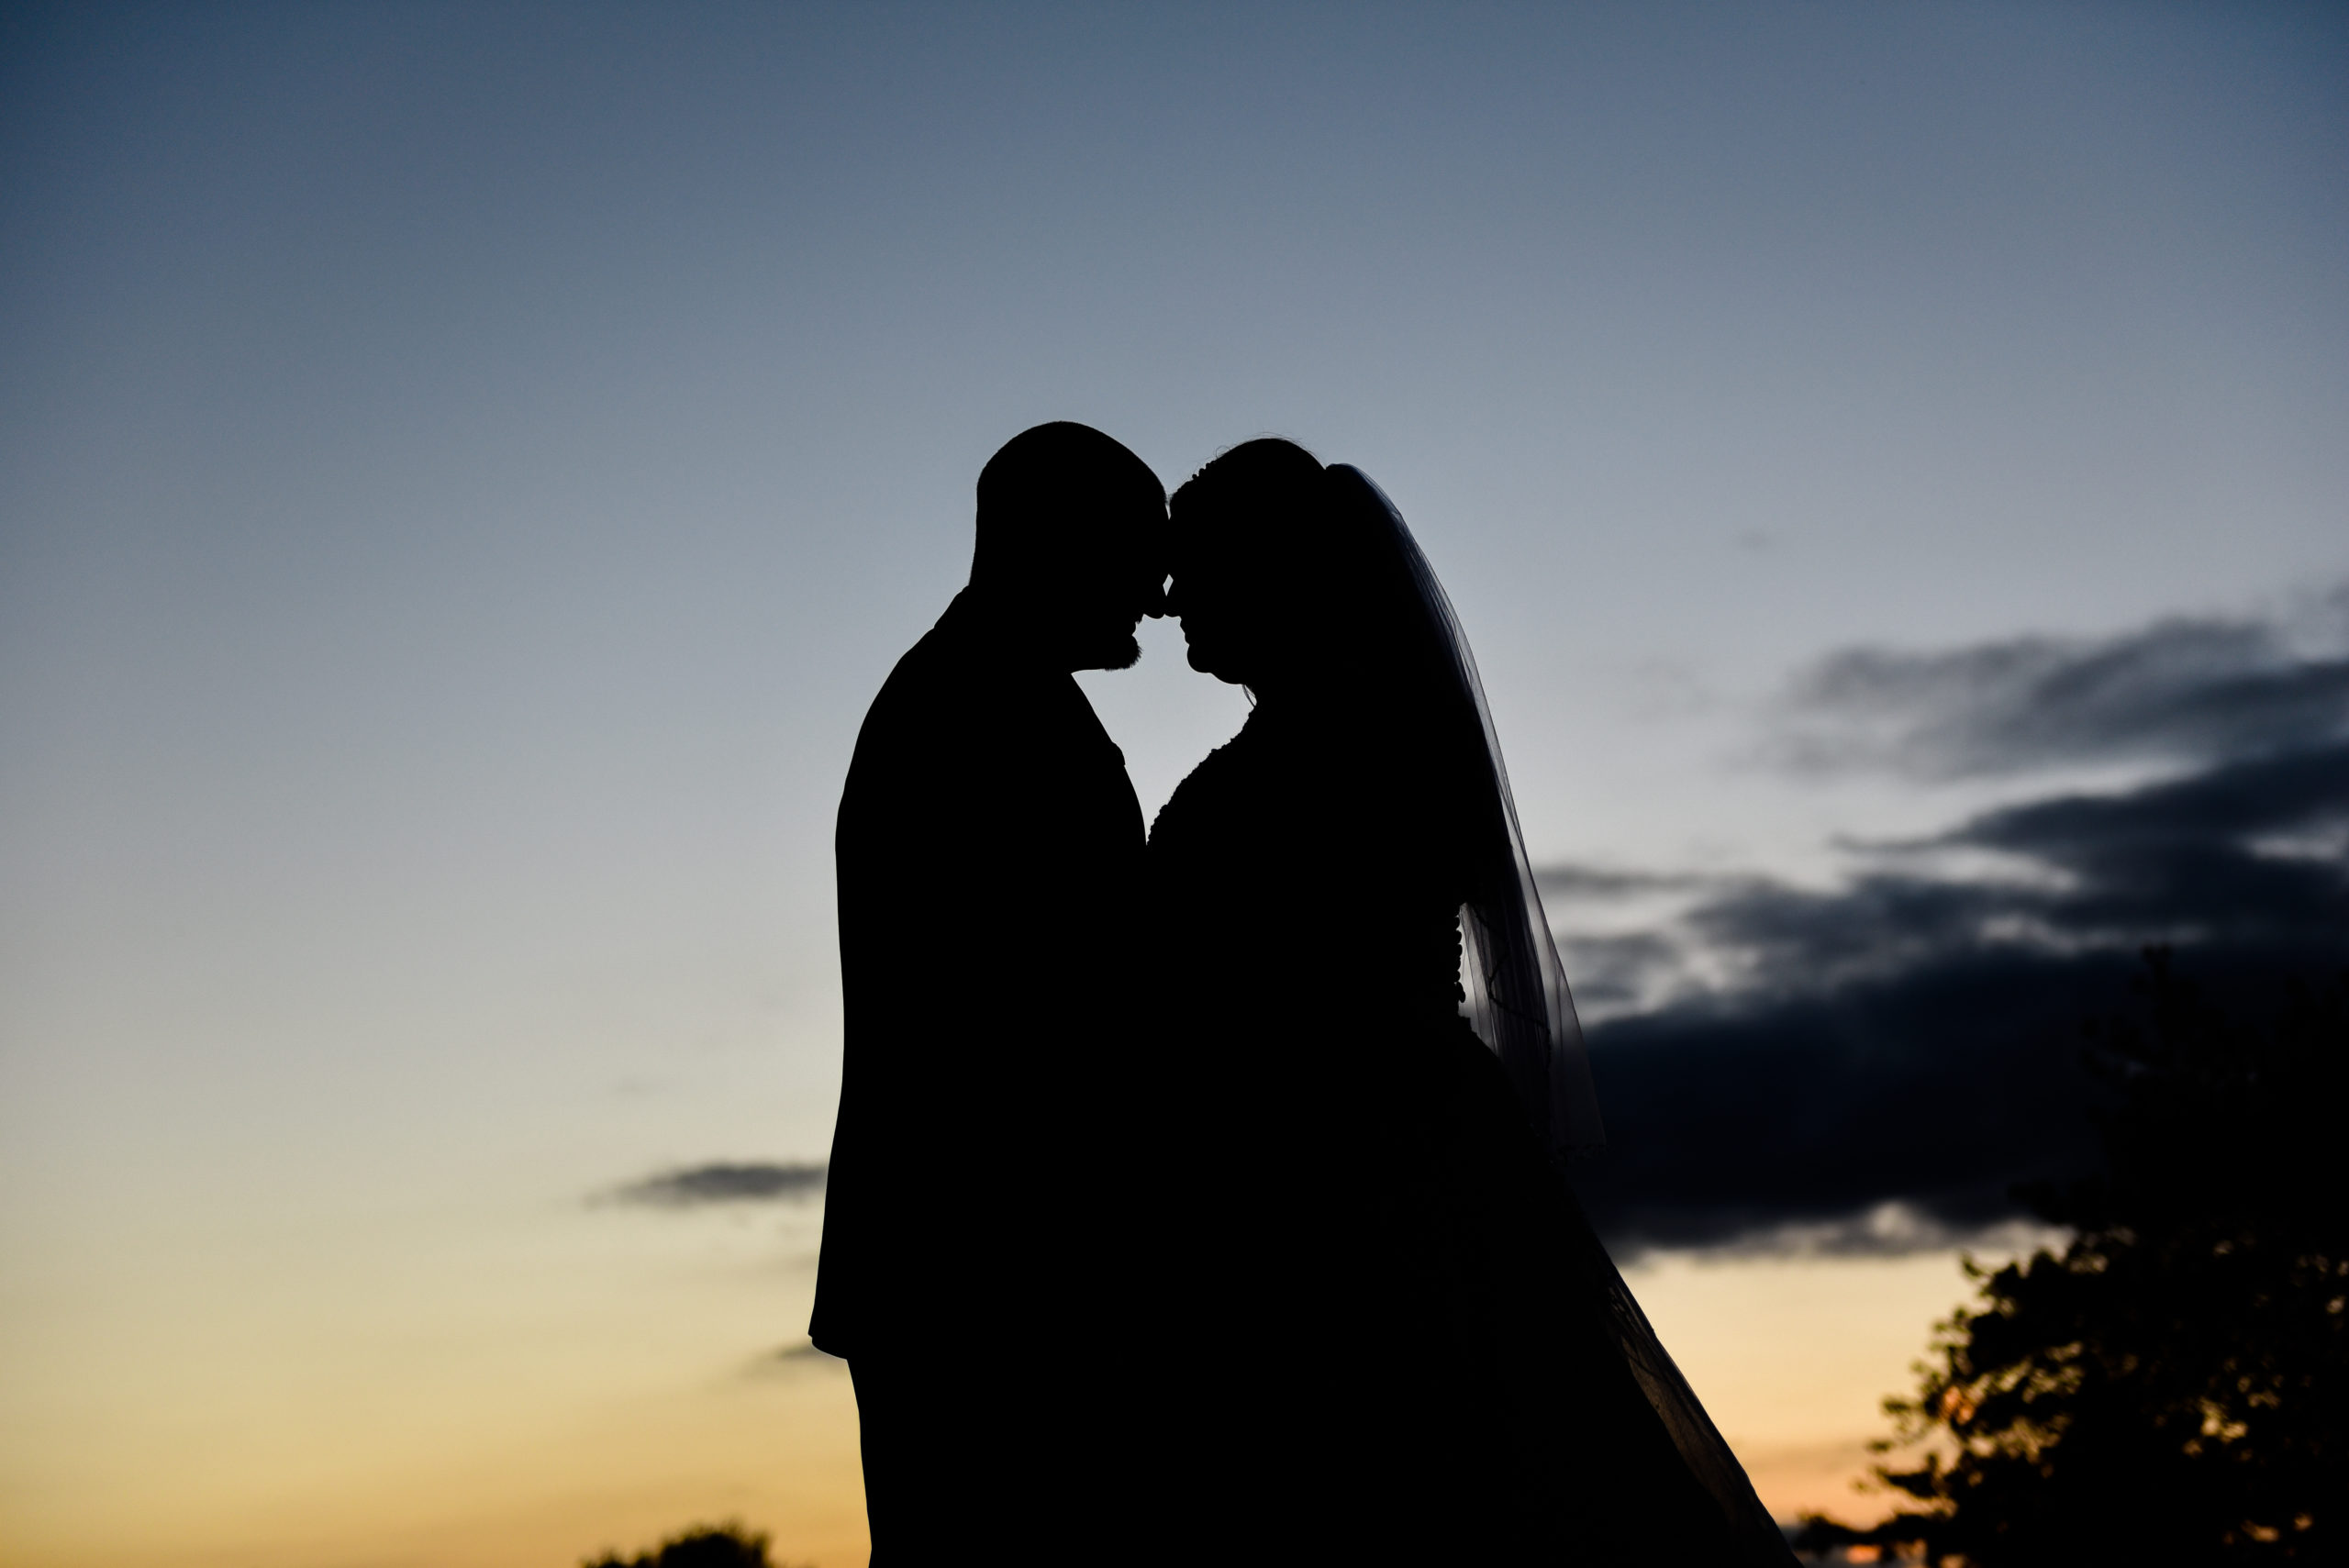 Silhouette shot of couple